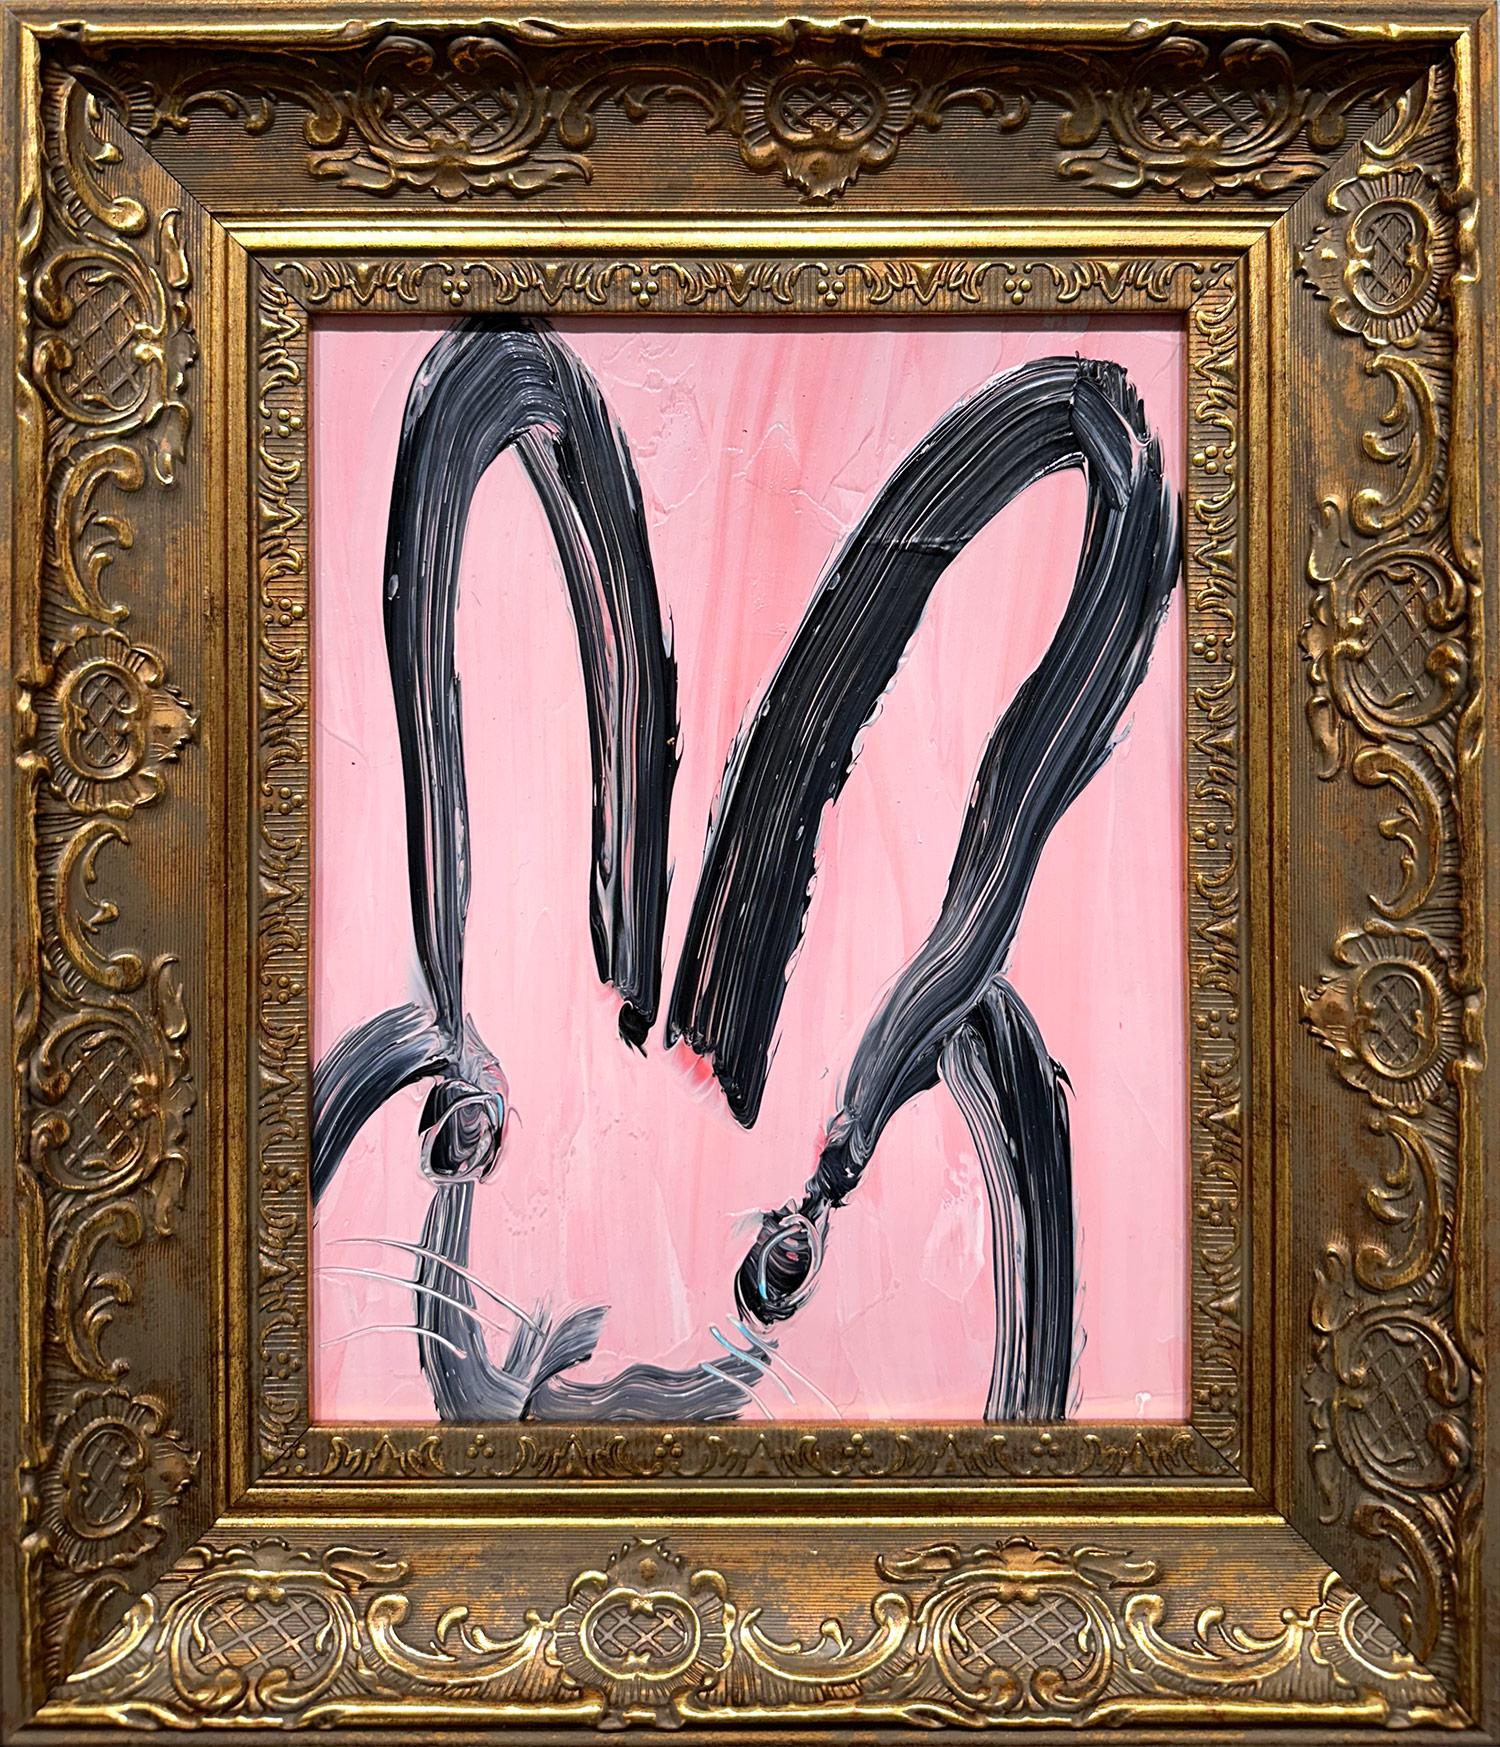 Hunt Slonem Abstract Painting - "Annette" Black Bunny on Light Pink Background Oil Painting on Wood Panel